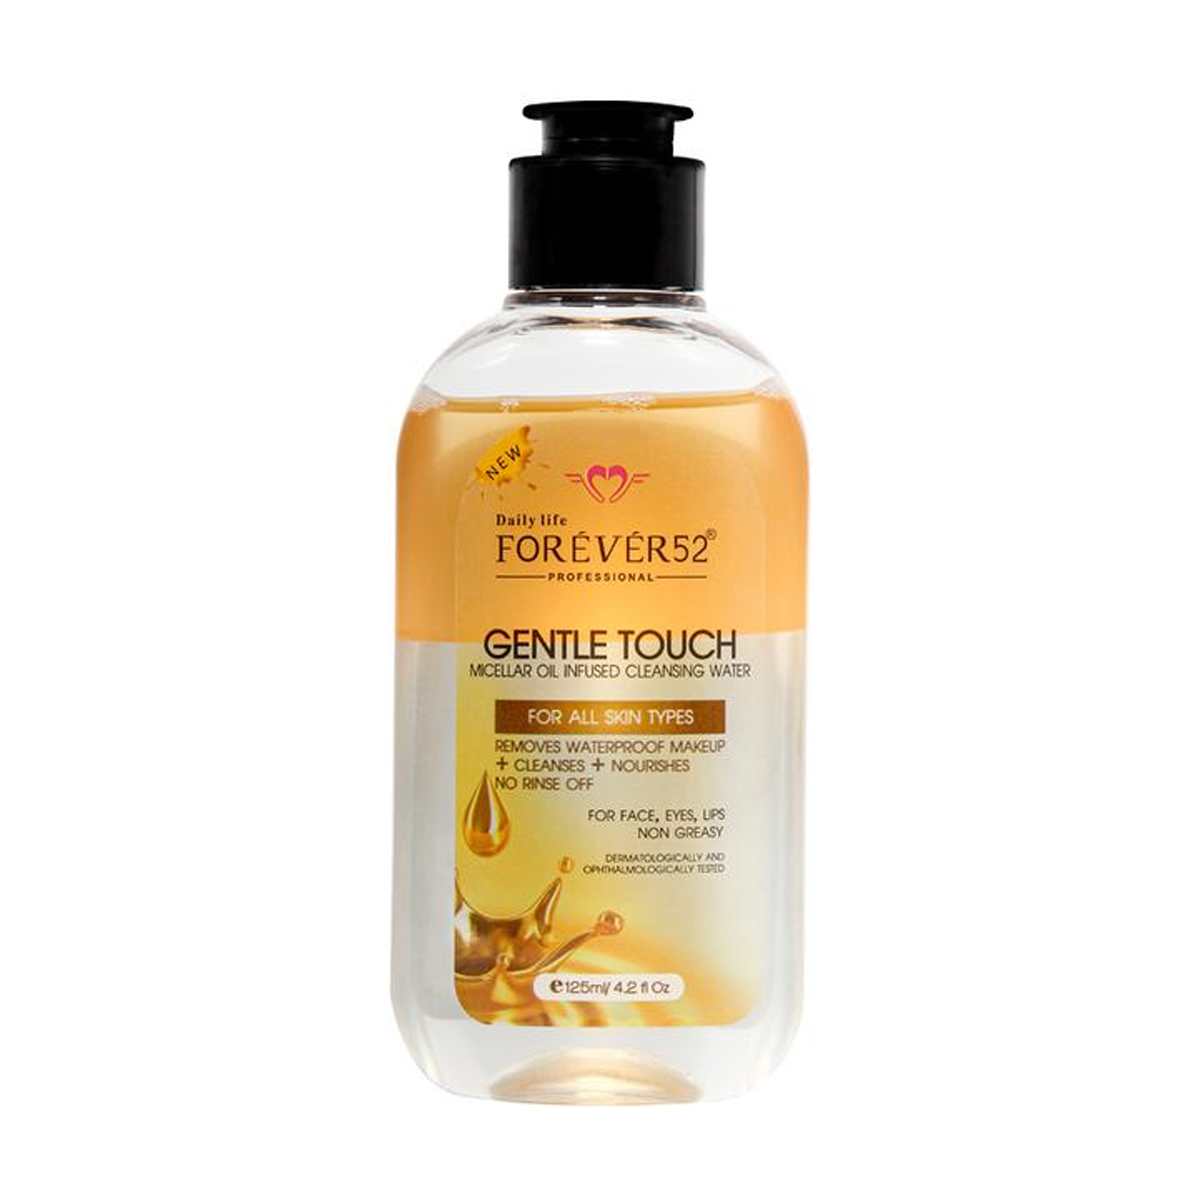 Micellar Oil Infused Cleansing Water Gentle Touch